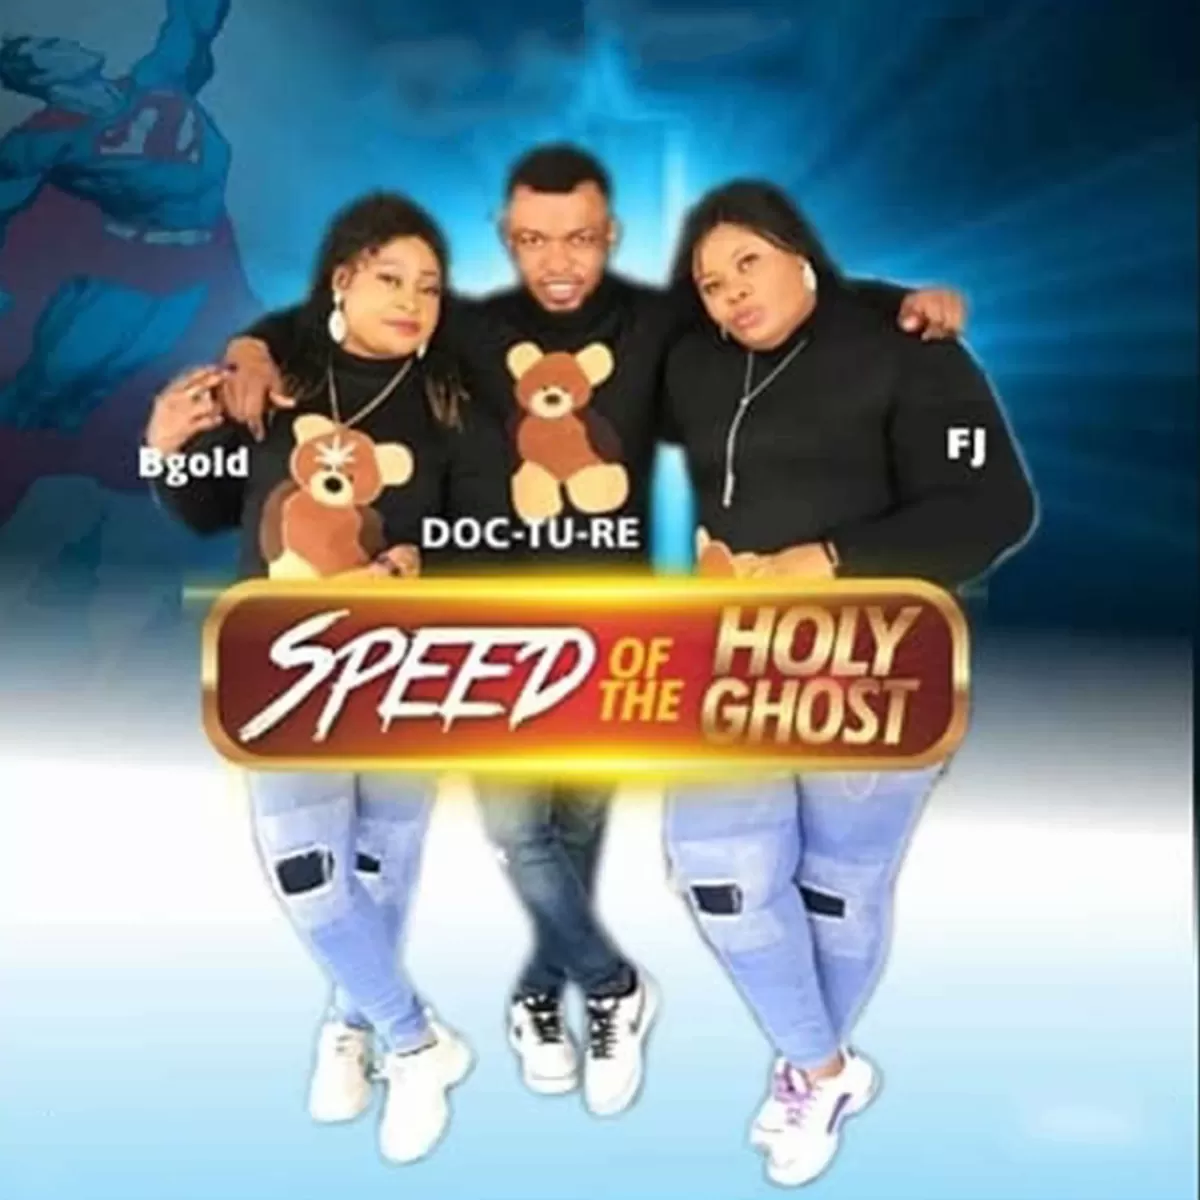 Speed of the Holy Ghost by DOC-TU-RE ft Bgold, FJ